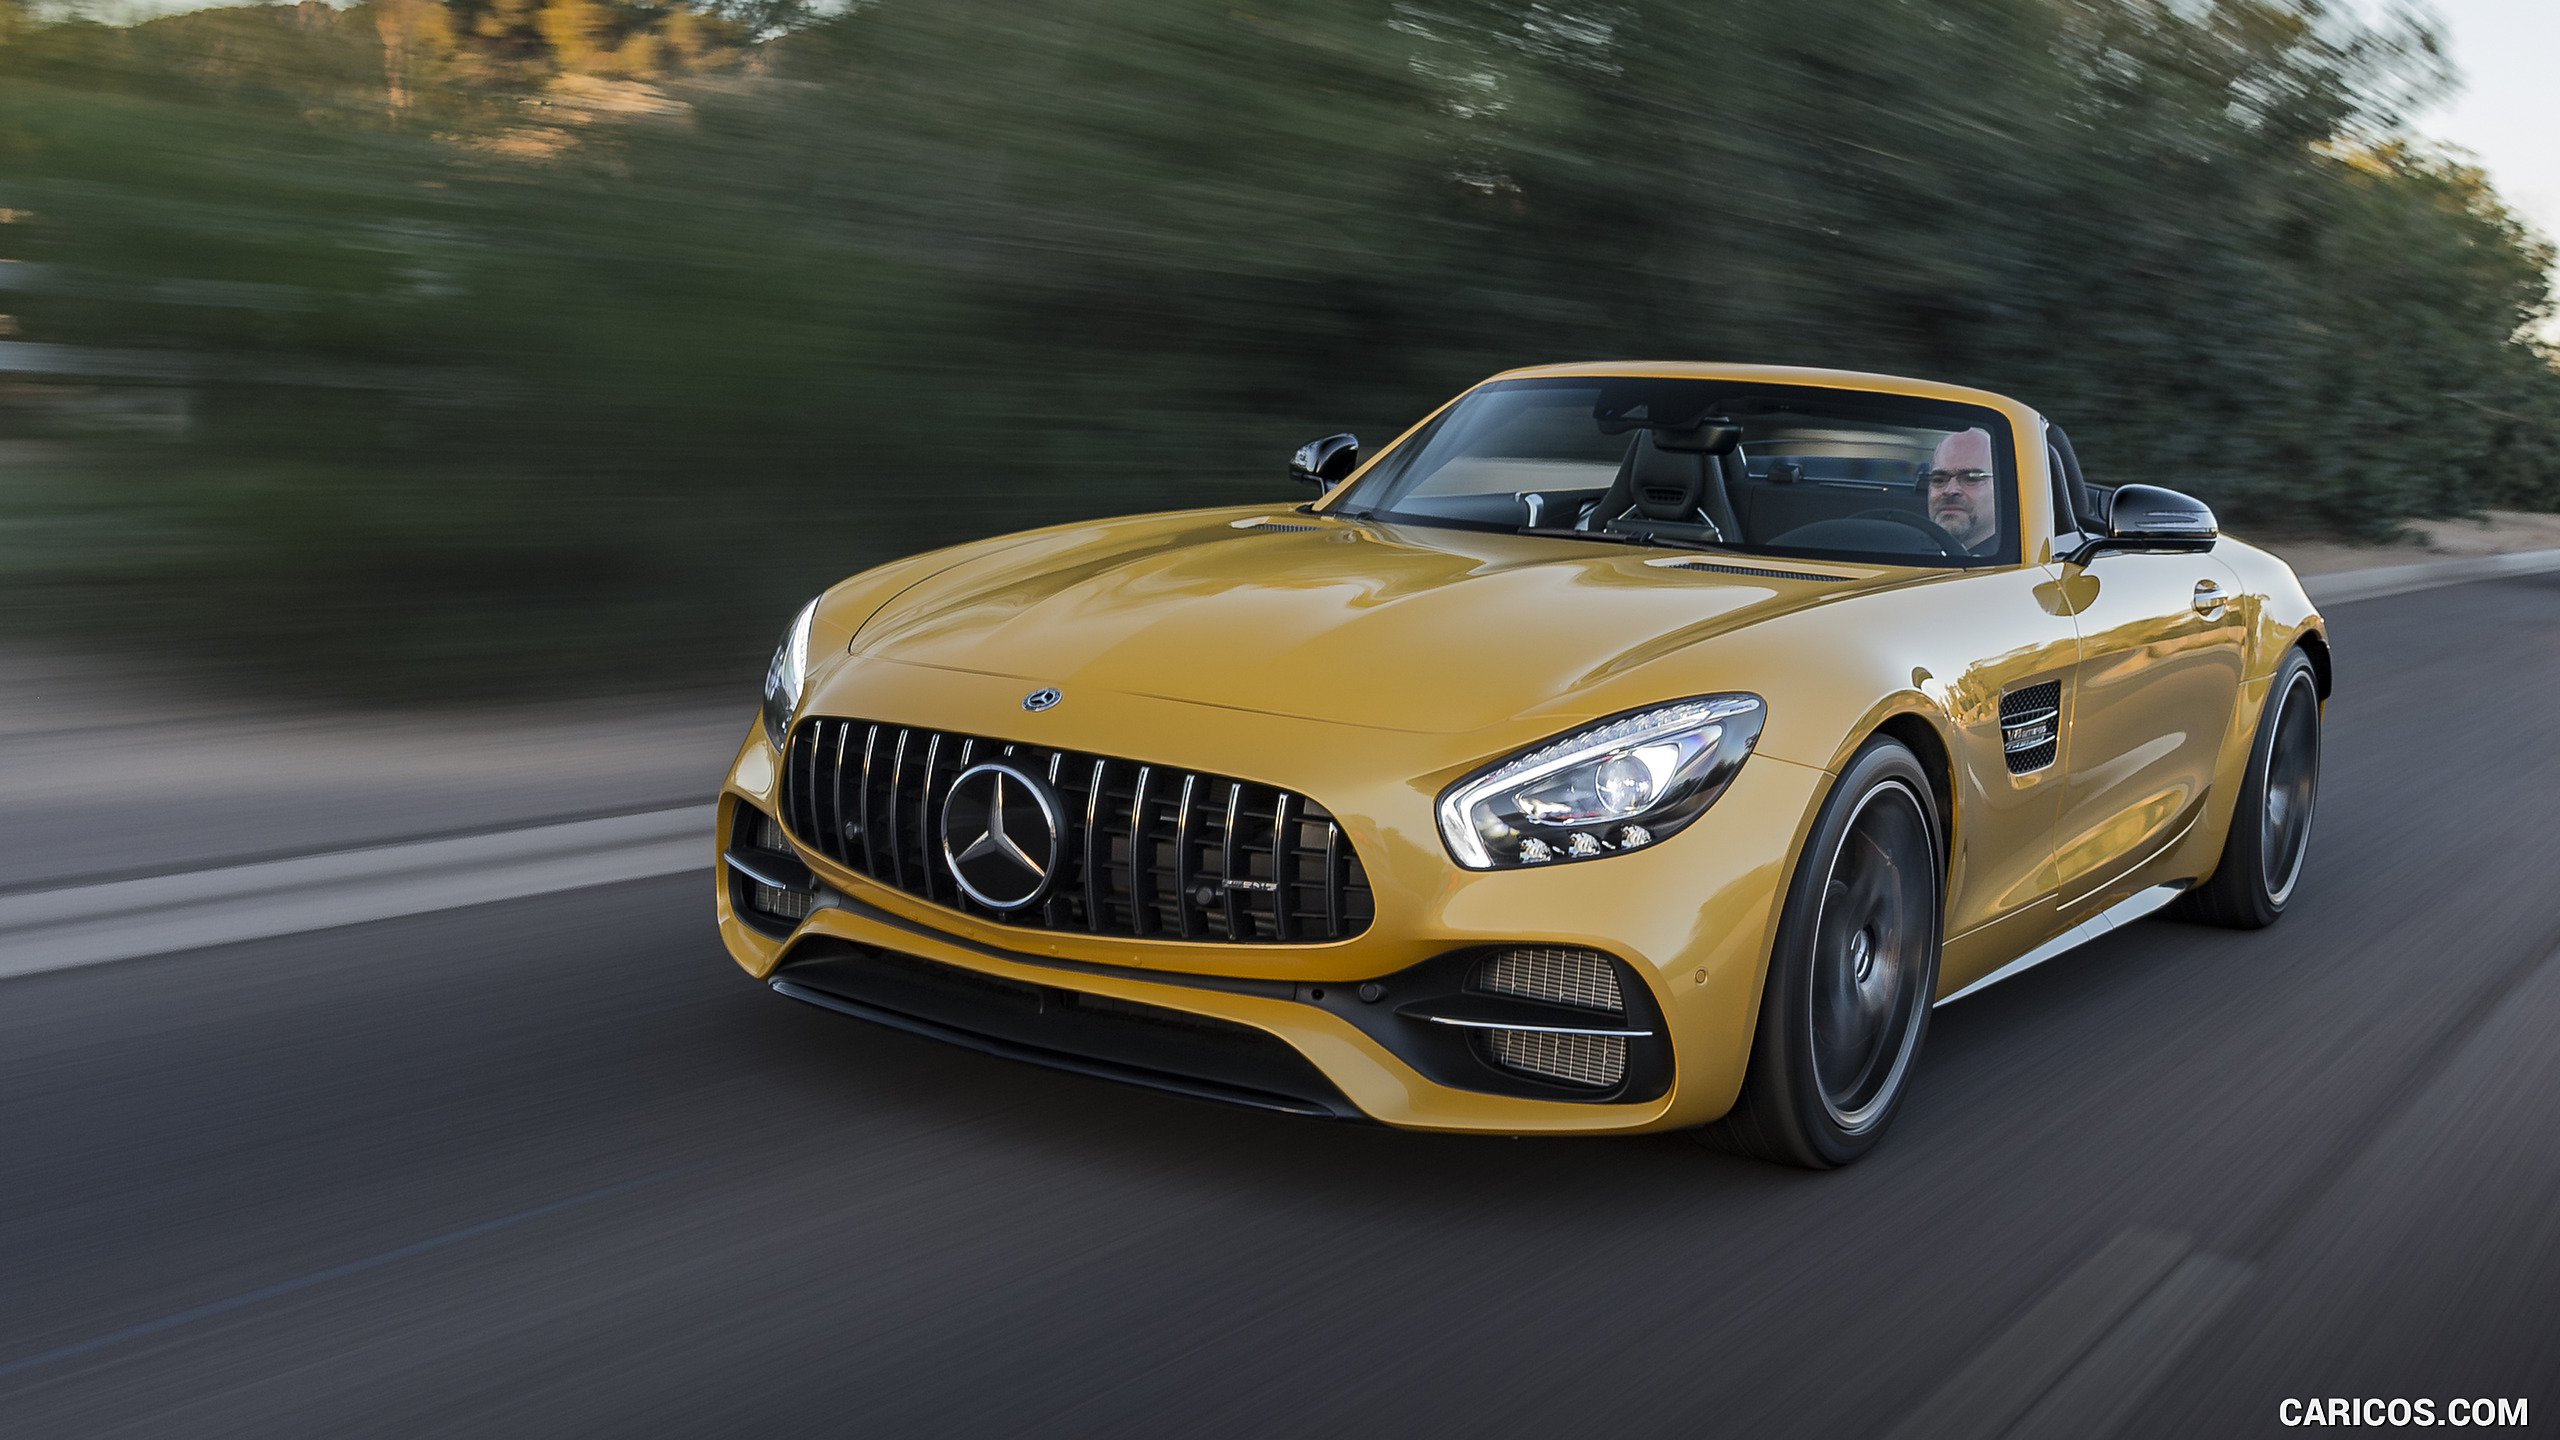 2018 Mercedes-AMG GT C Roadster - Front Three-Quarter, #224 of 350